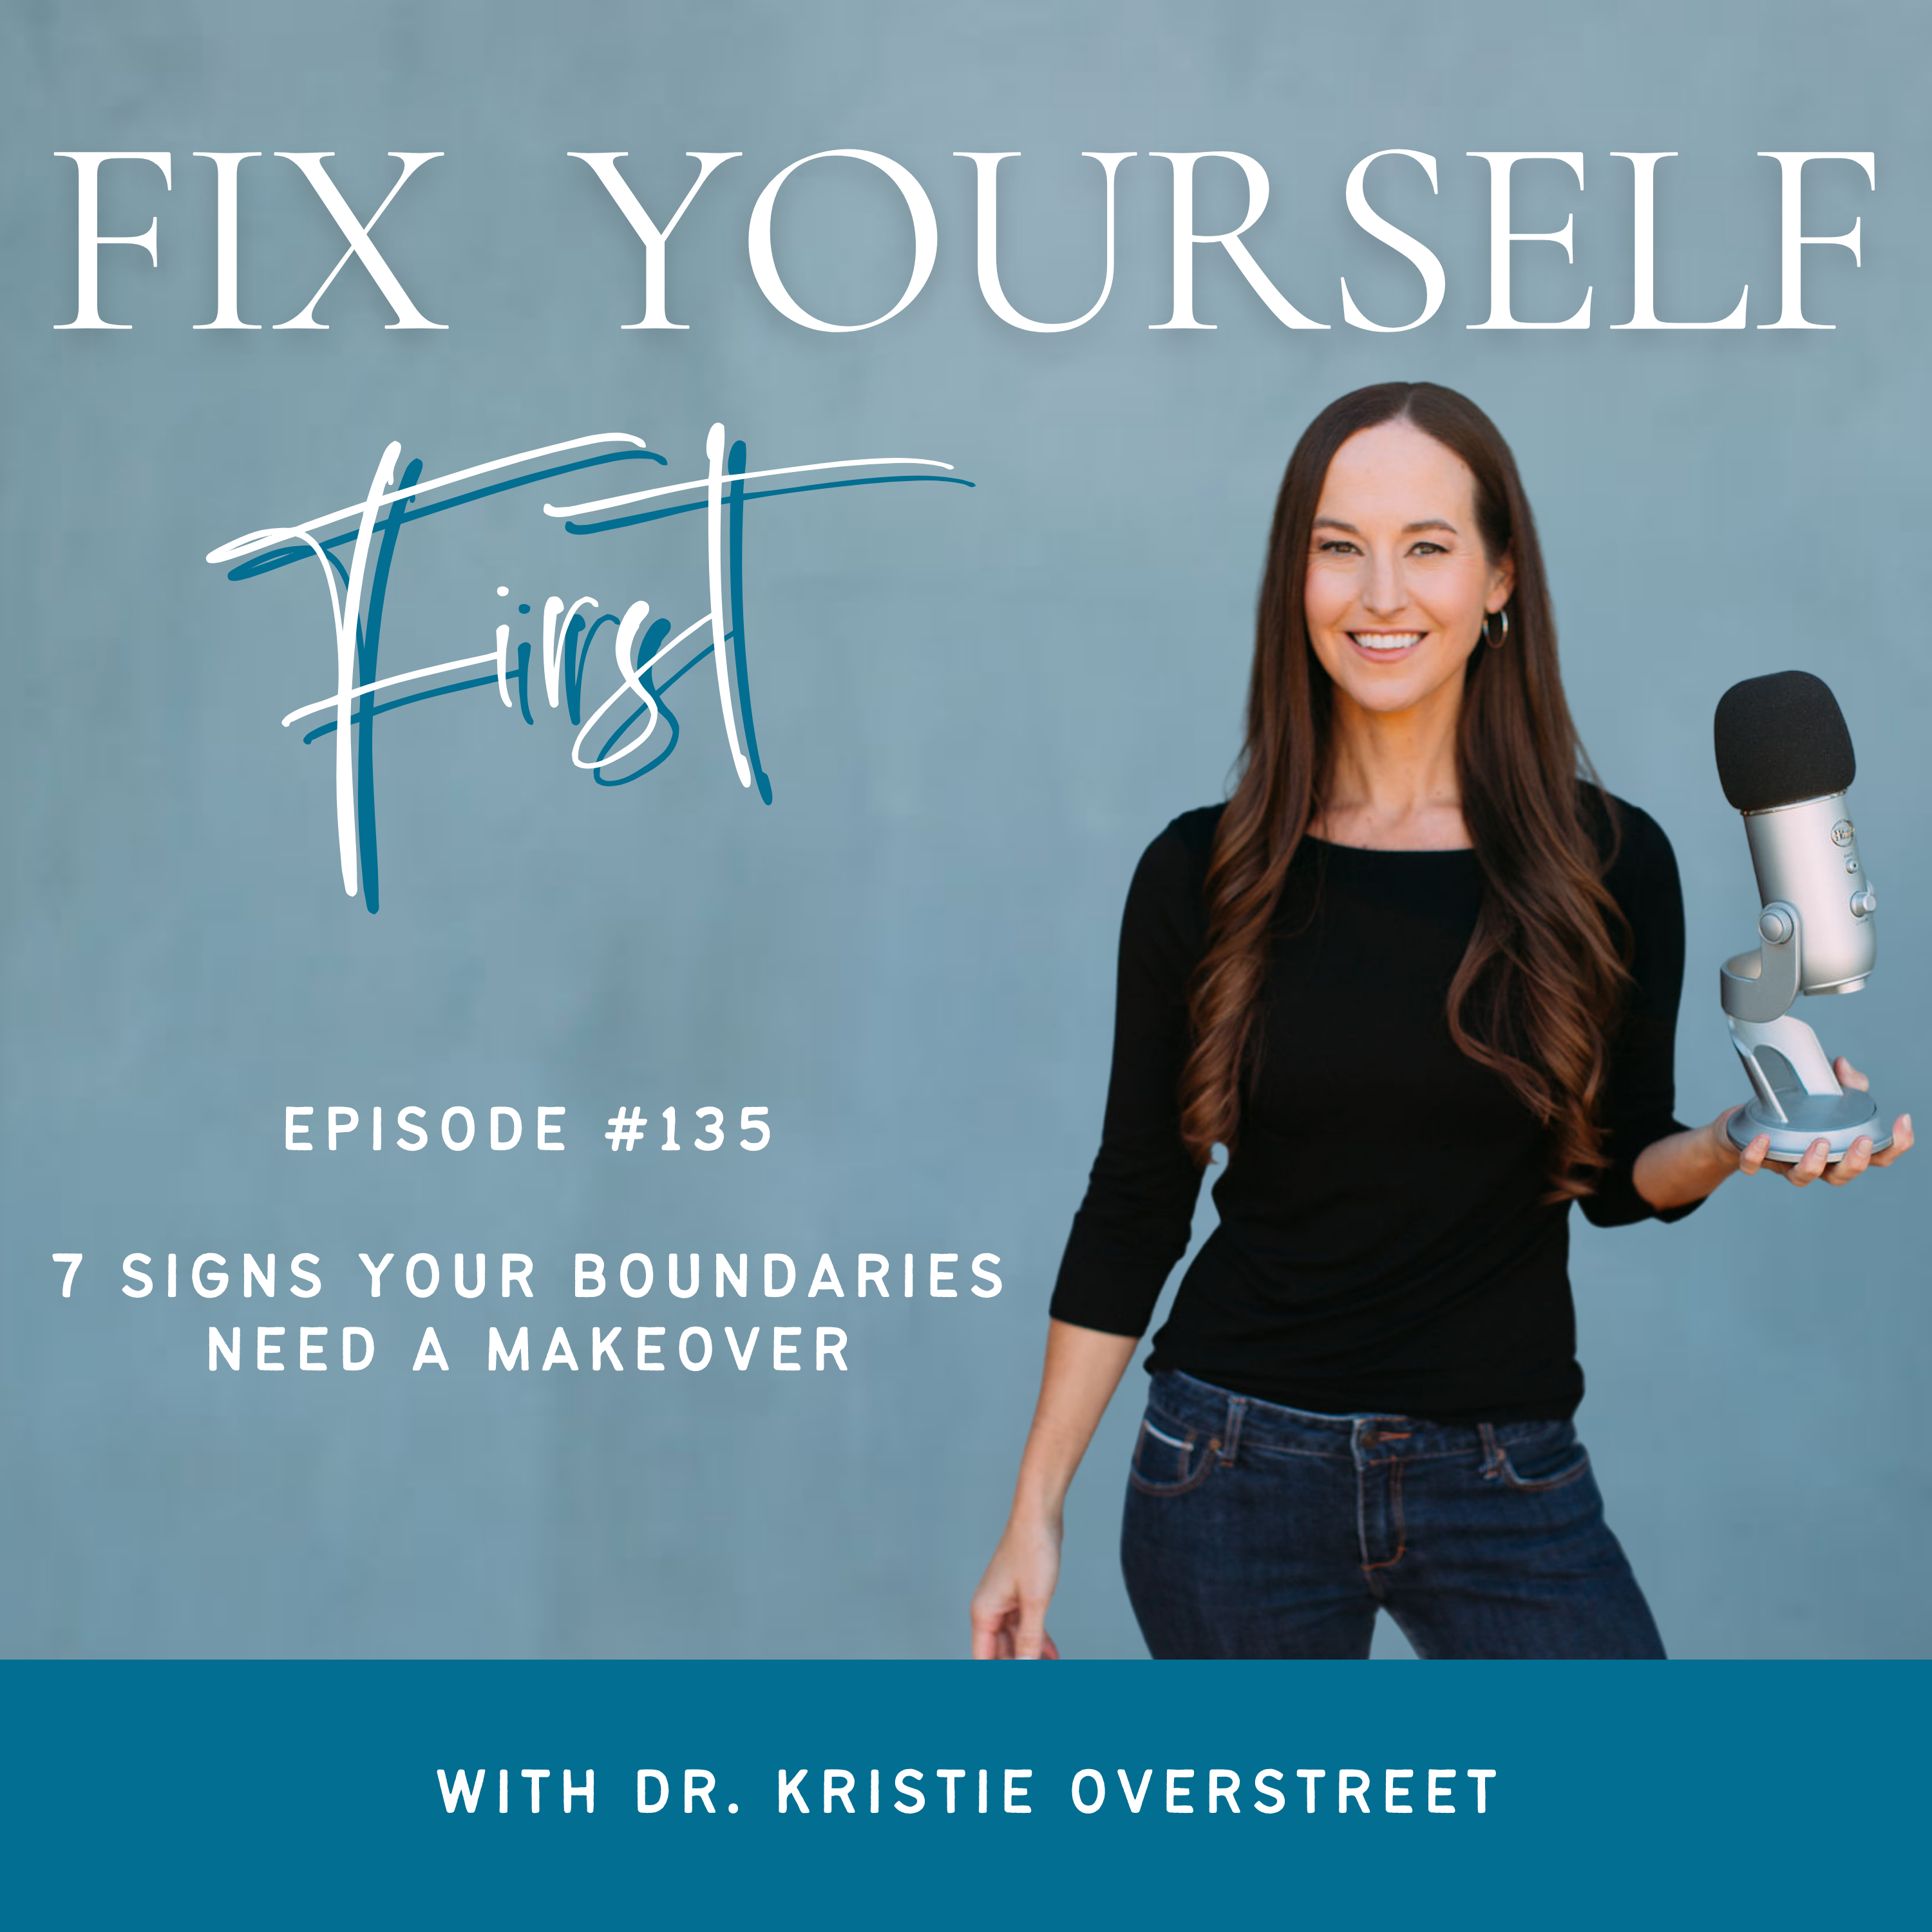 Fix Yourself First Episode 135 7 Signs Your Boundaries Need a Makeover